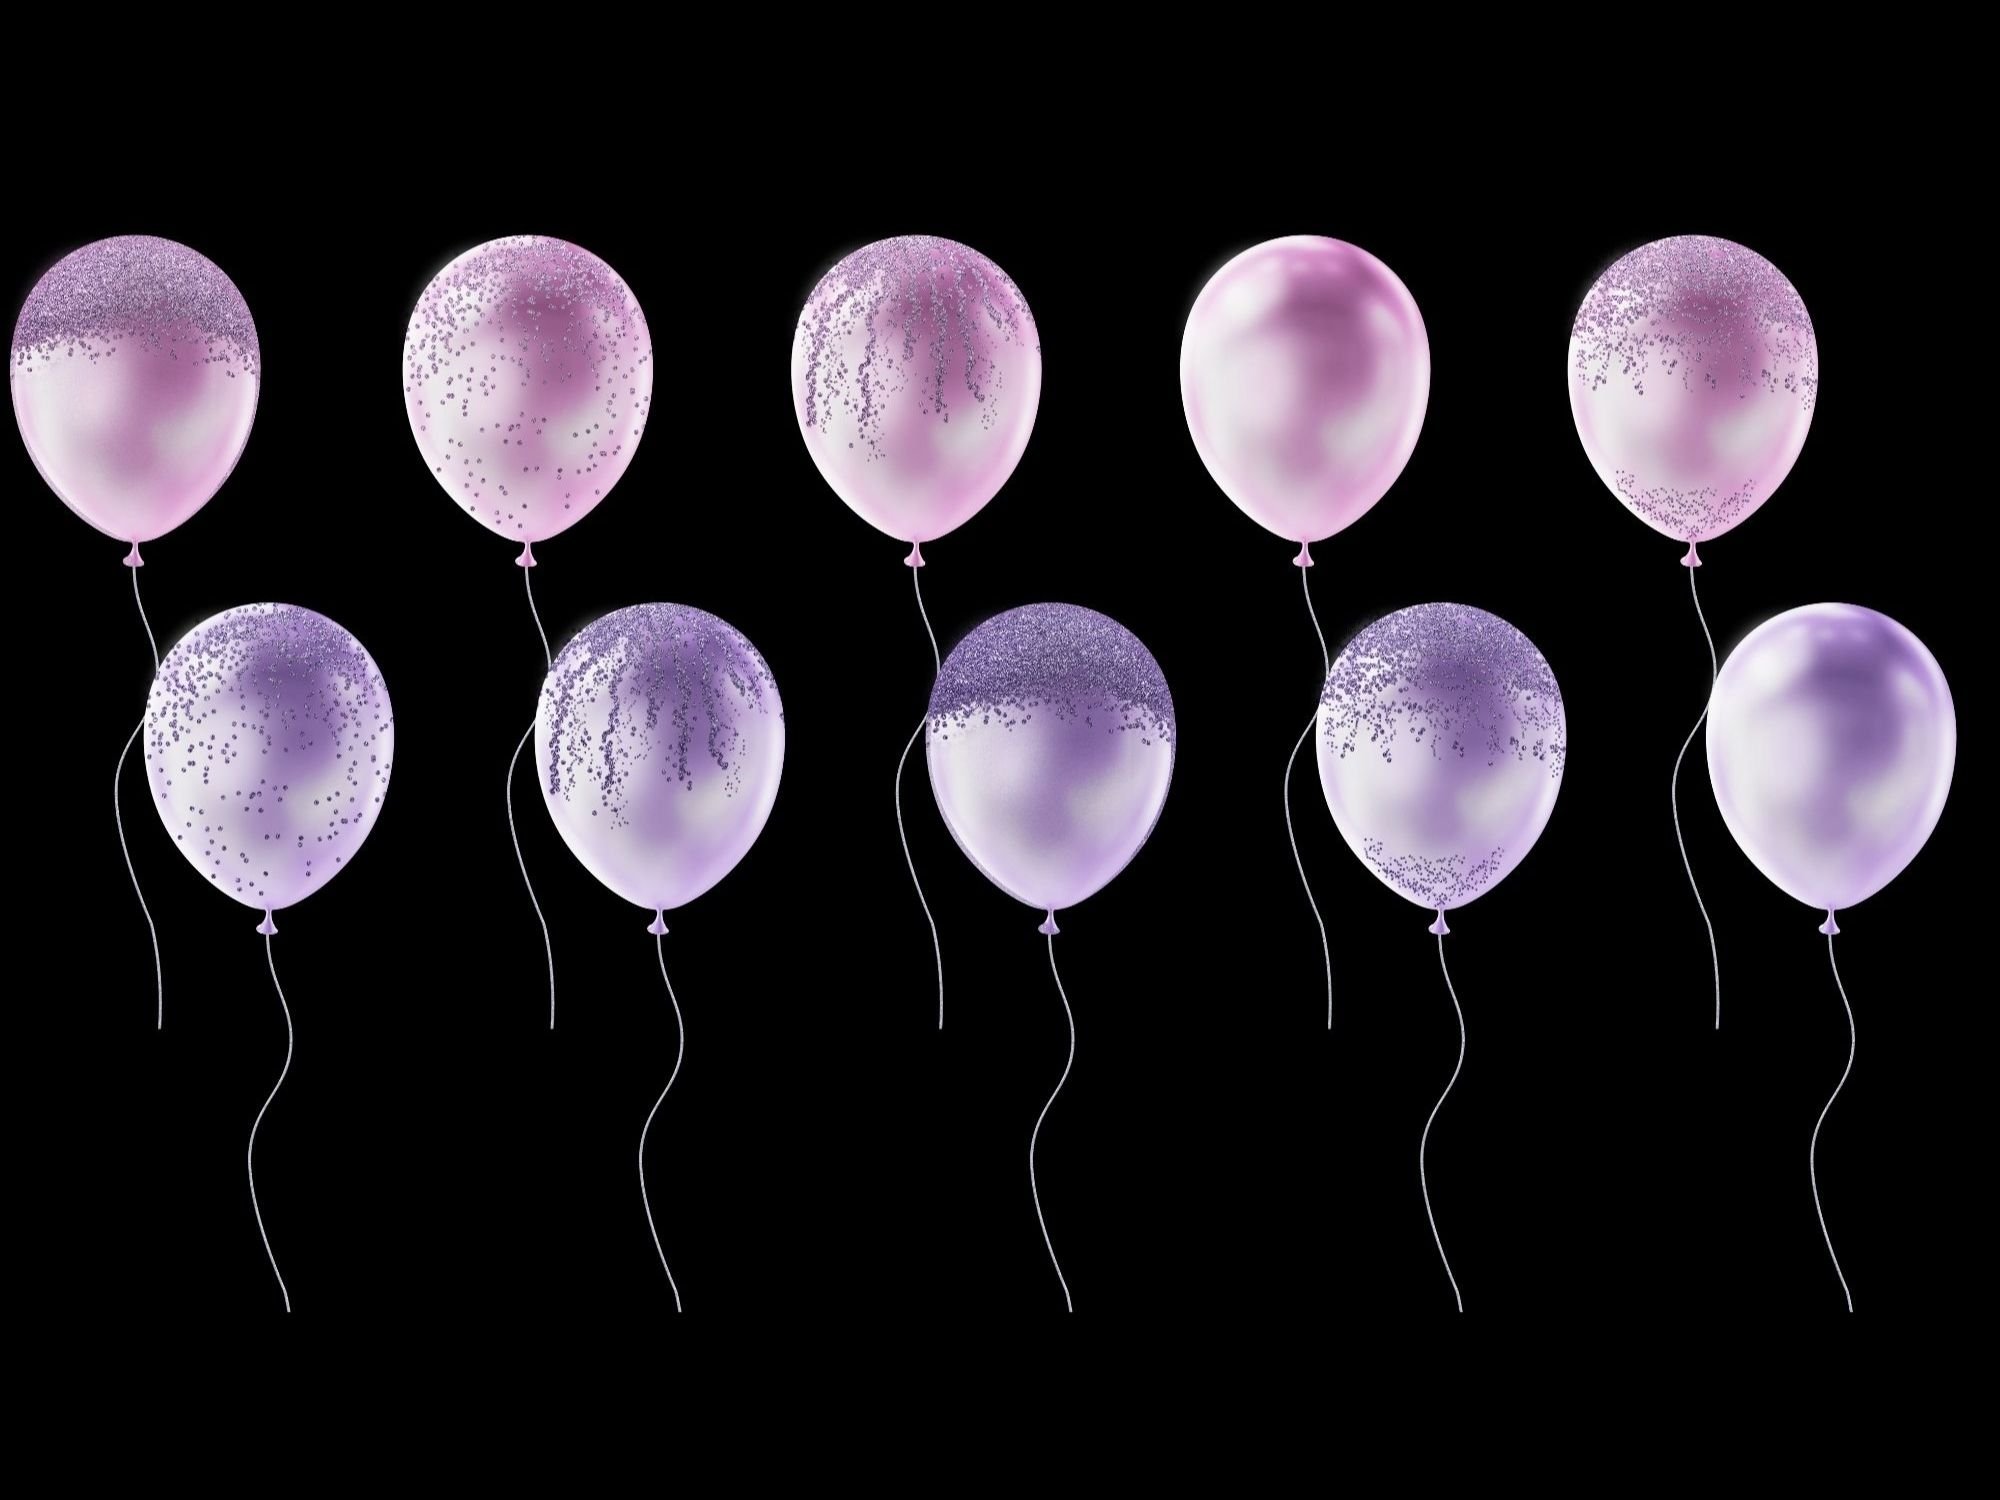 Black background with purple and lilac balloons.